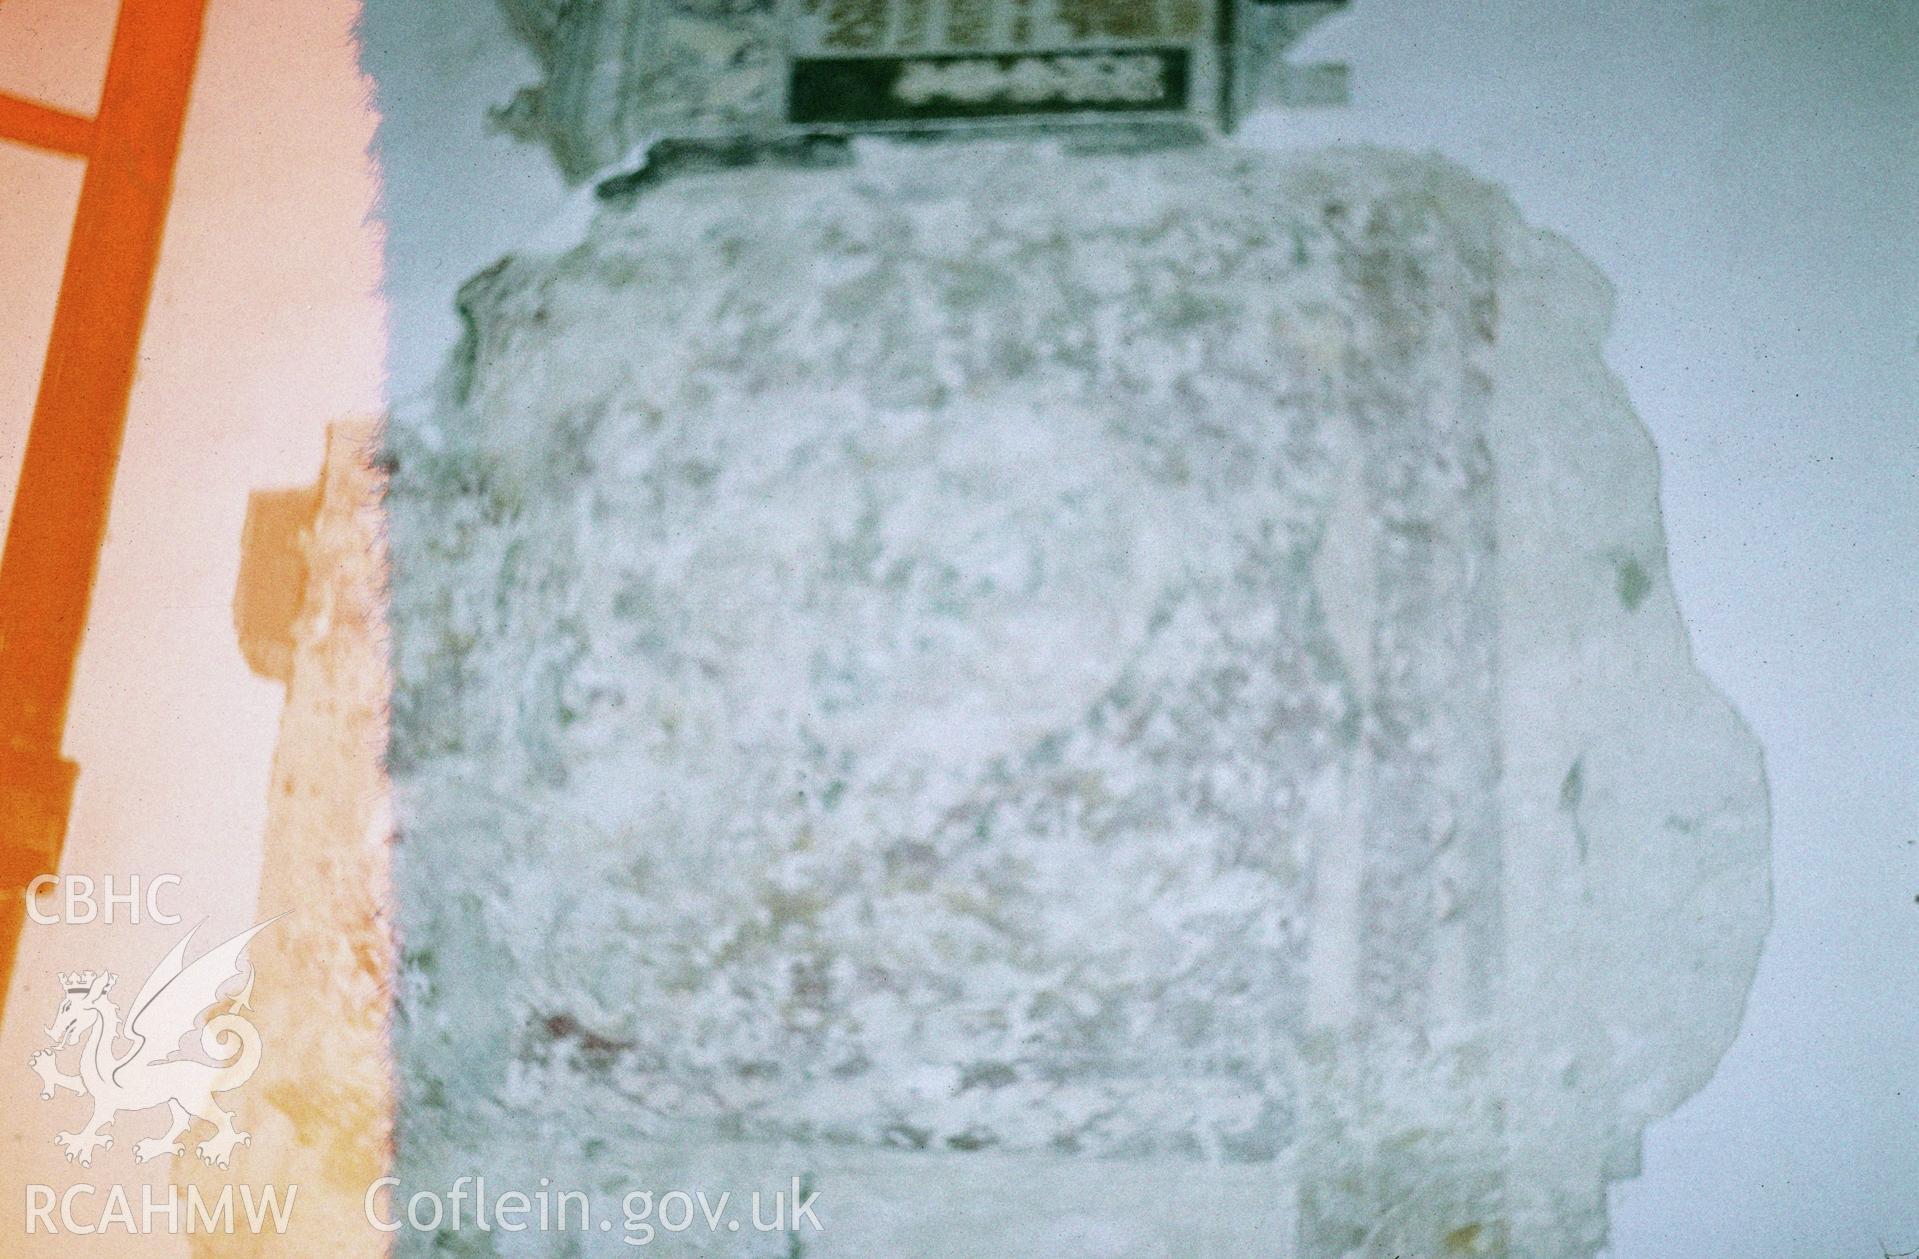 35mm colour slide showing the wallpainting at St. Melangells' Church, Pennant by Dylan Roberts, undated.